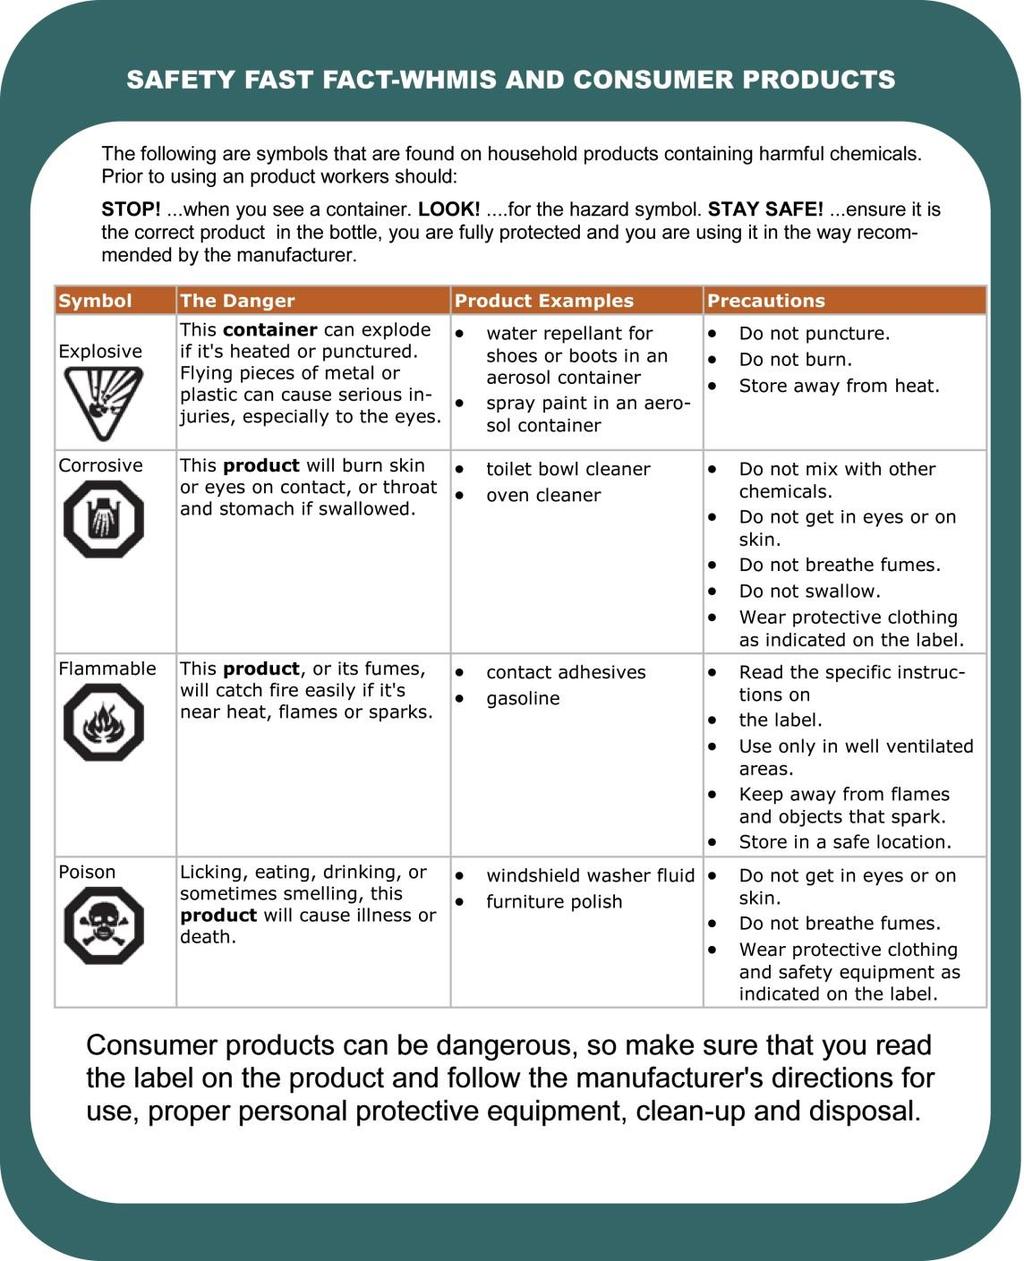 Consumer Product Symbols Many products are made and packaged as household or consumer products, and their labelling is slightly different.